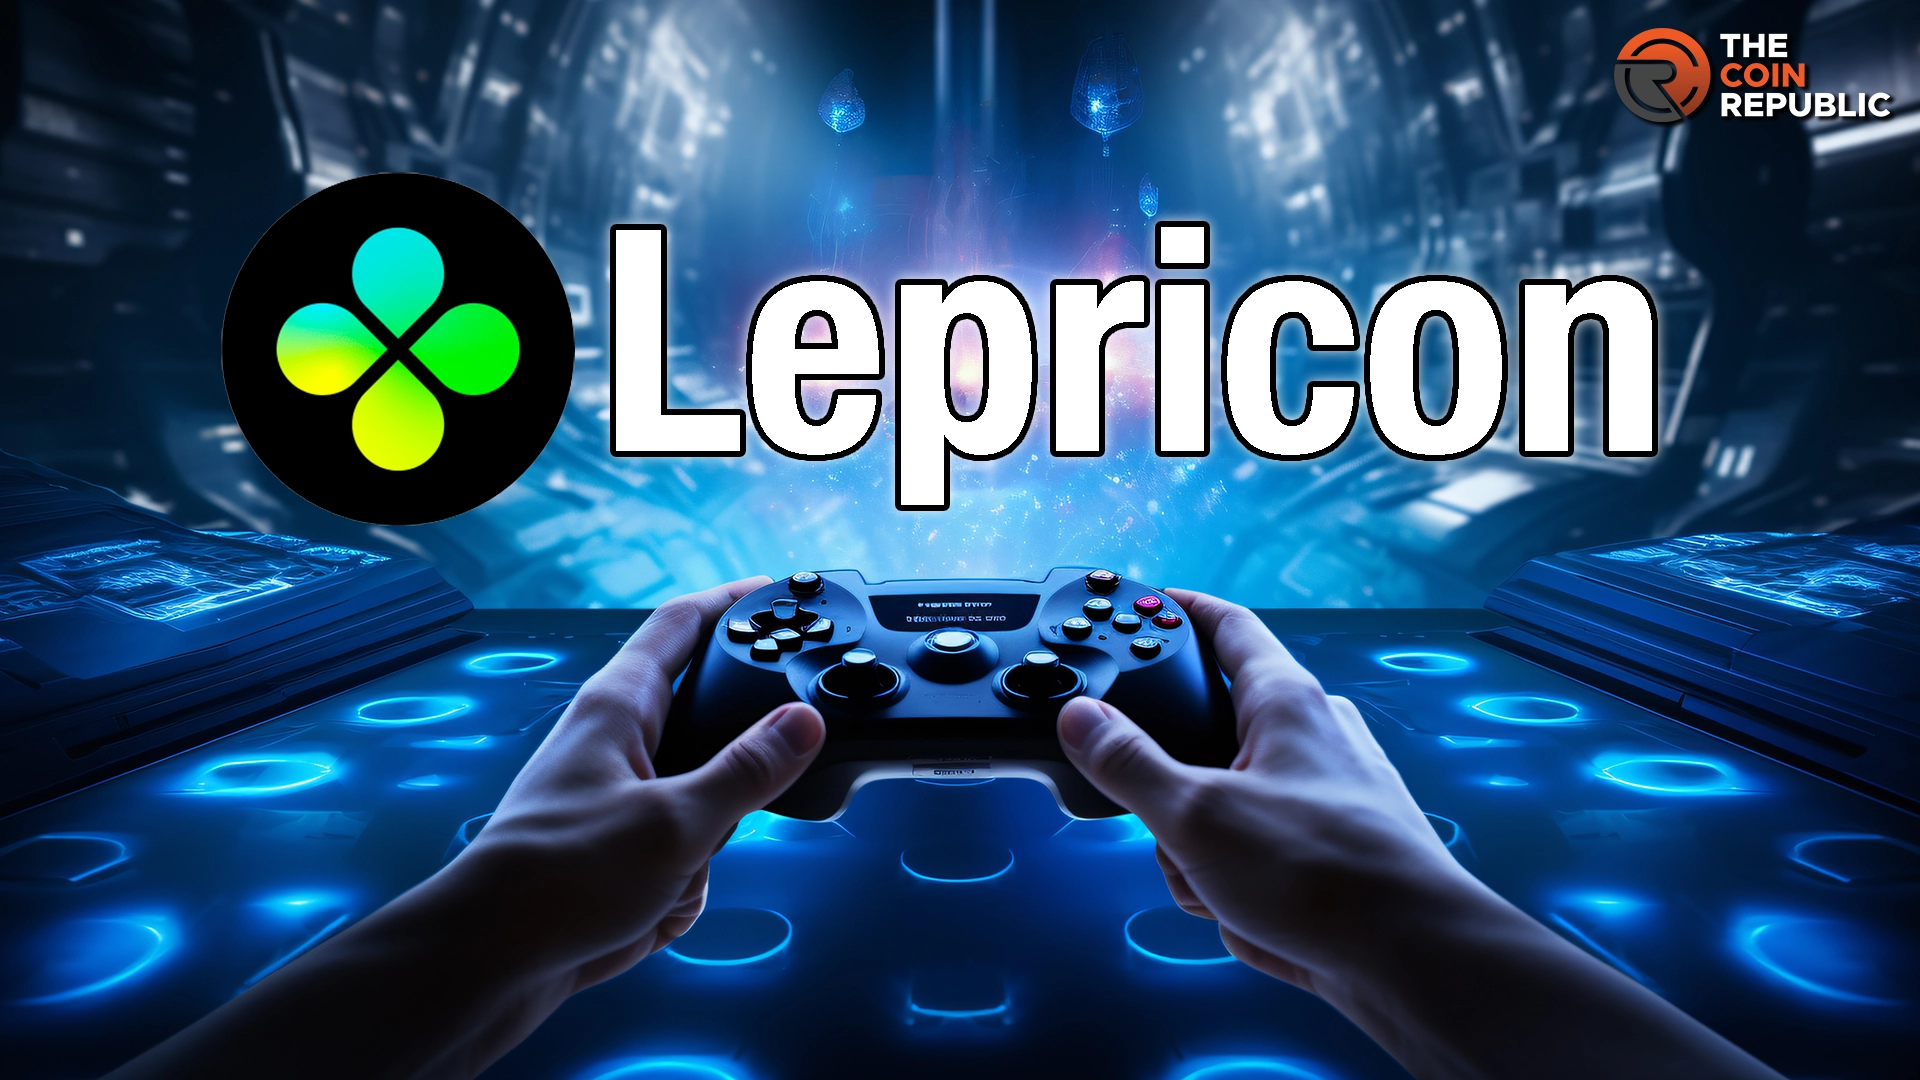 Lepricon: Redefining Gaming and Entertainment